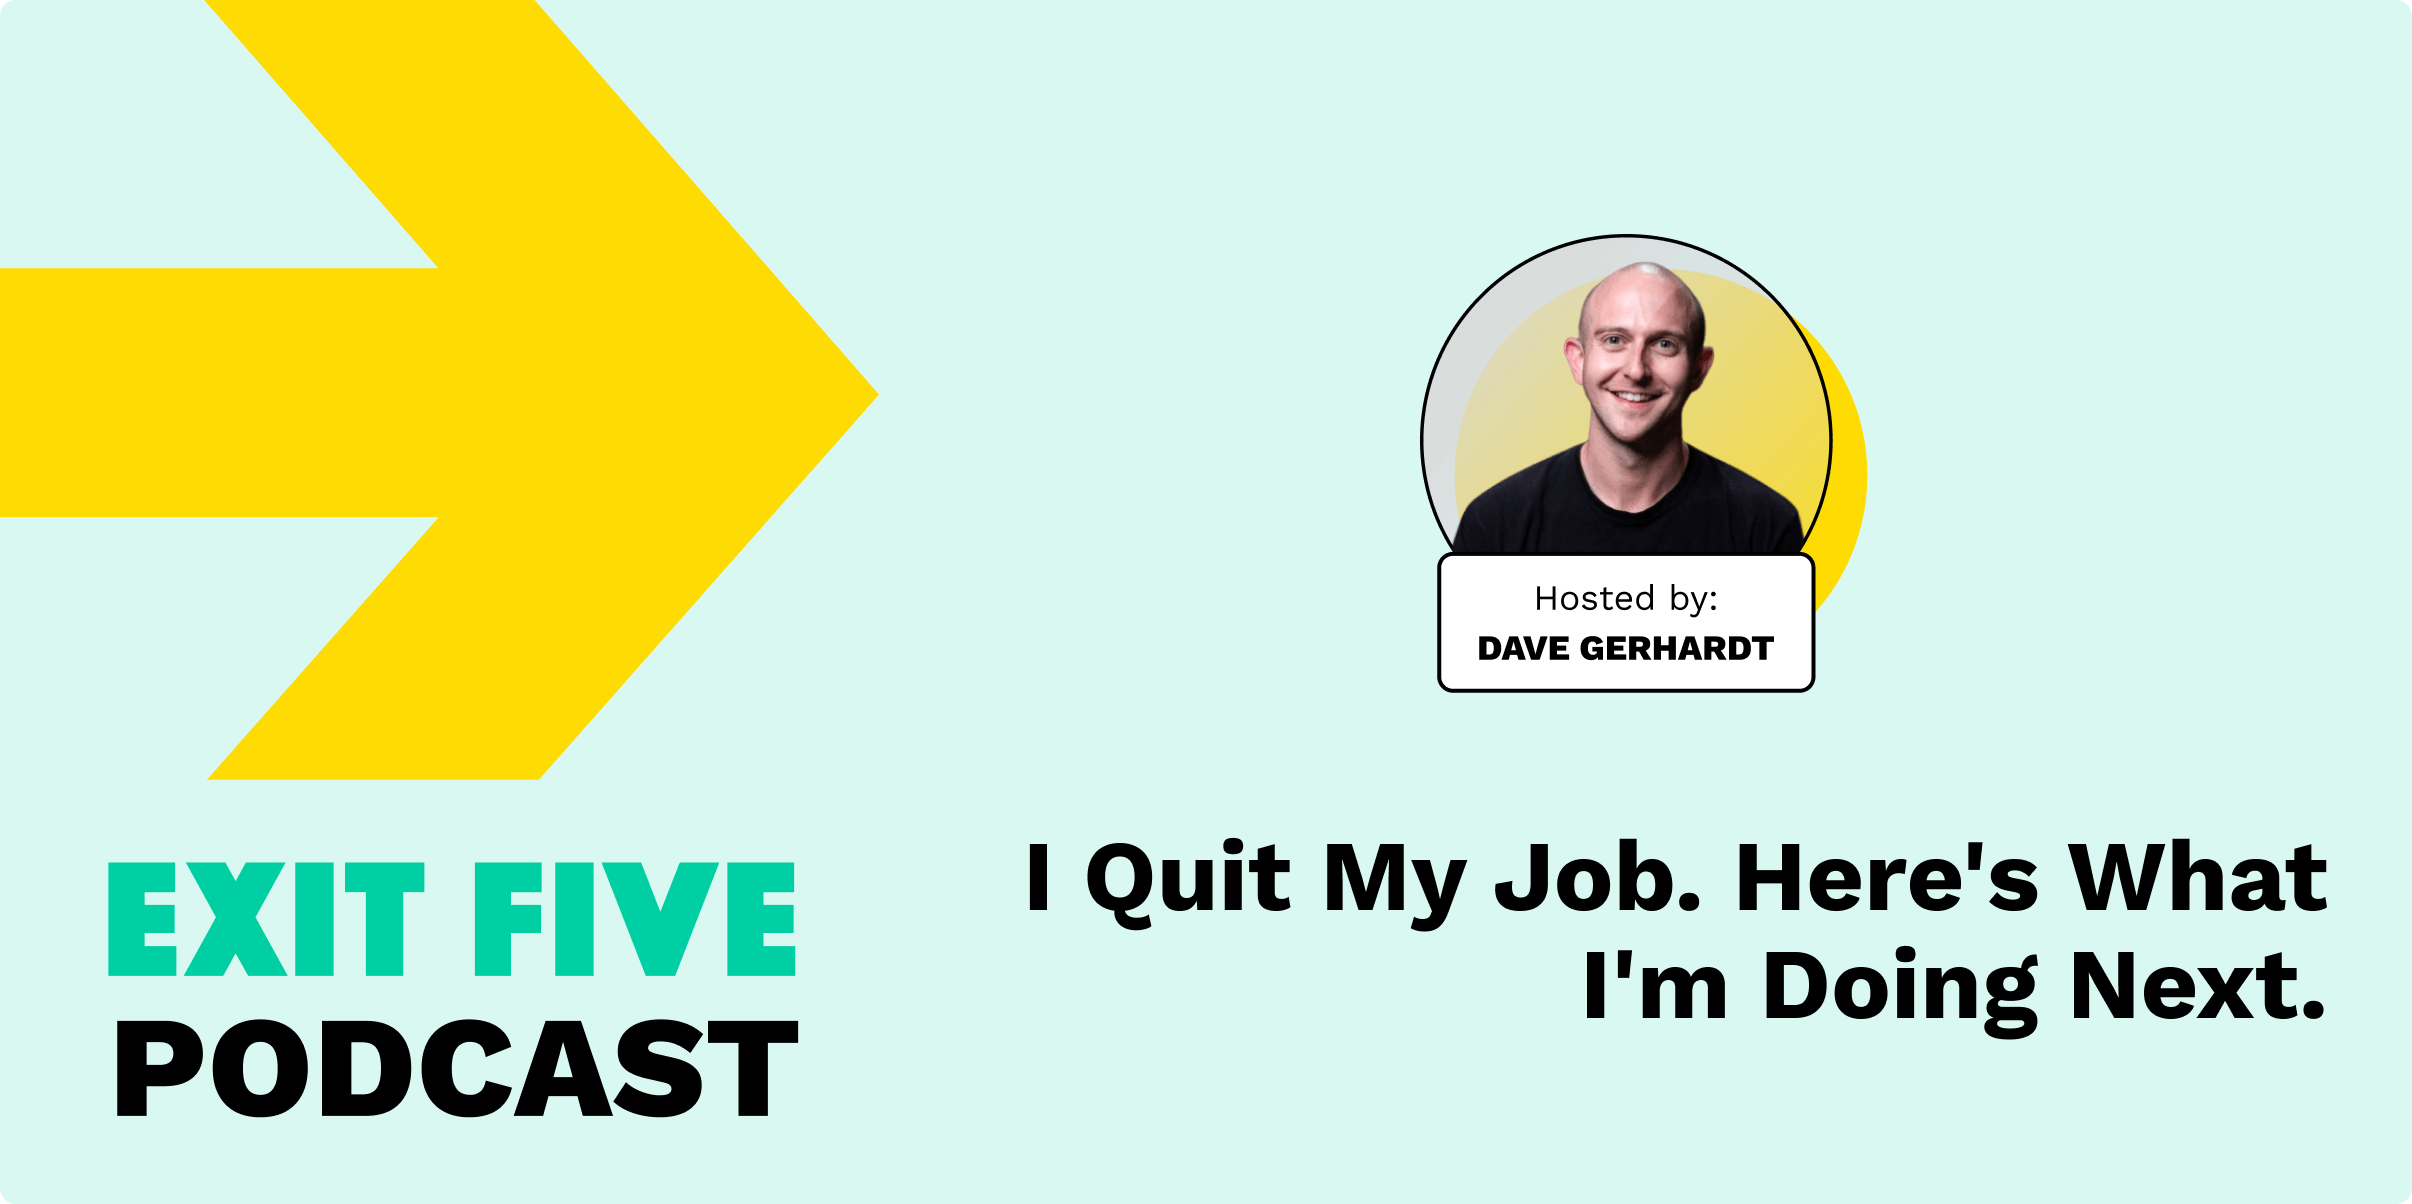 #1 I Quit My Job. Here's What I'm Doing Next.